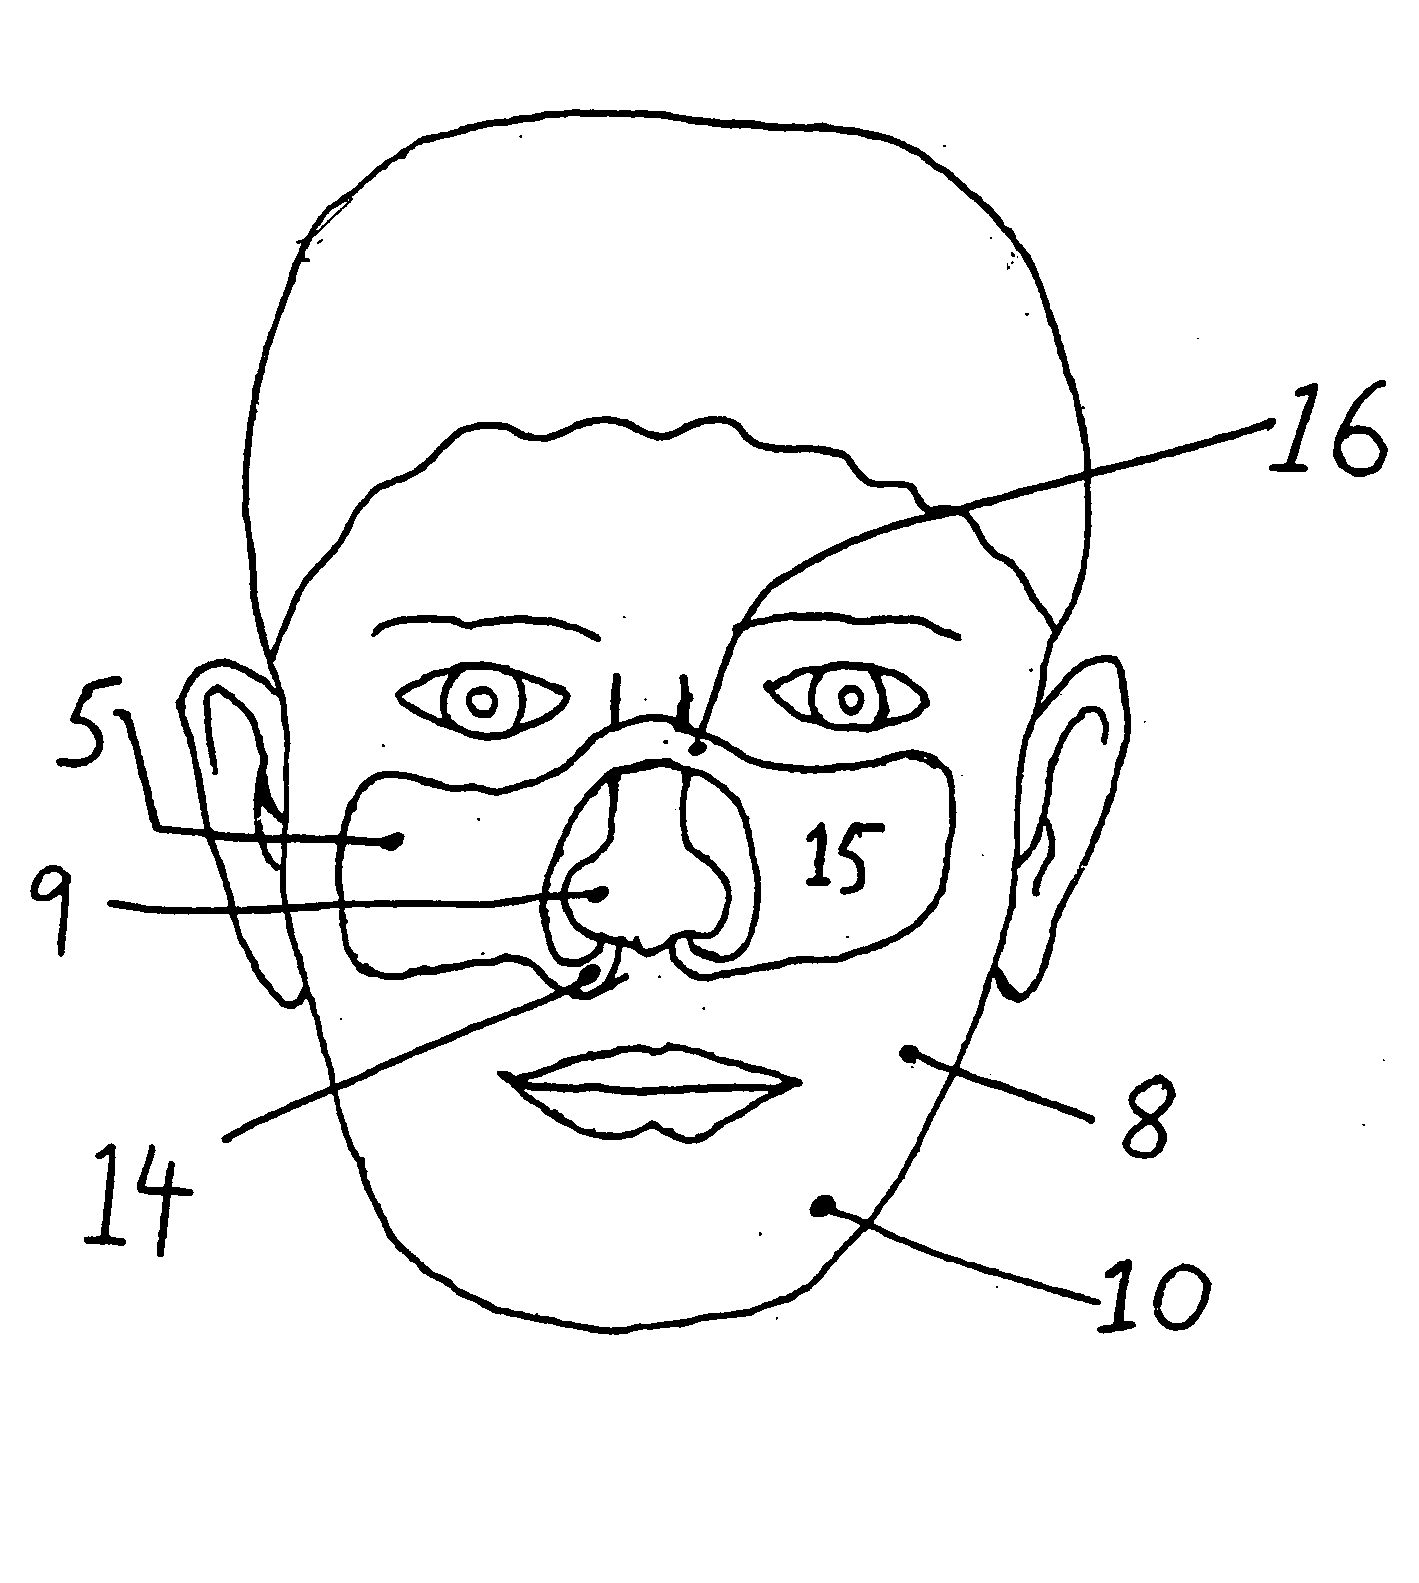 Continuous nasal irrigation device